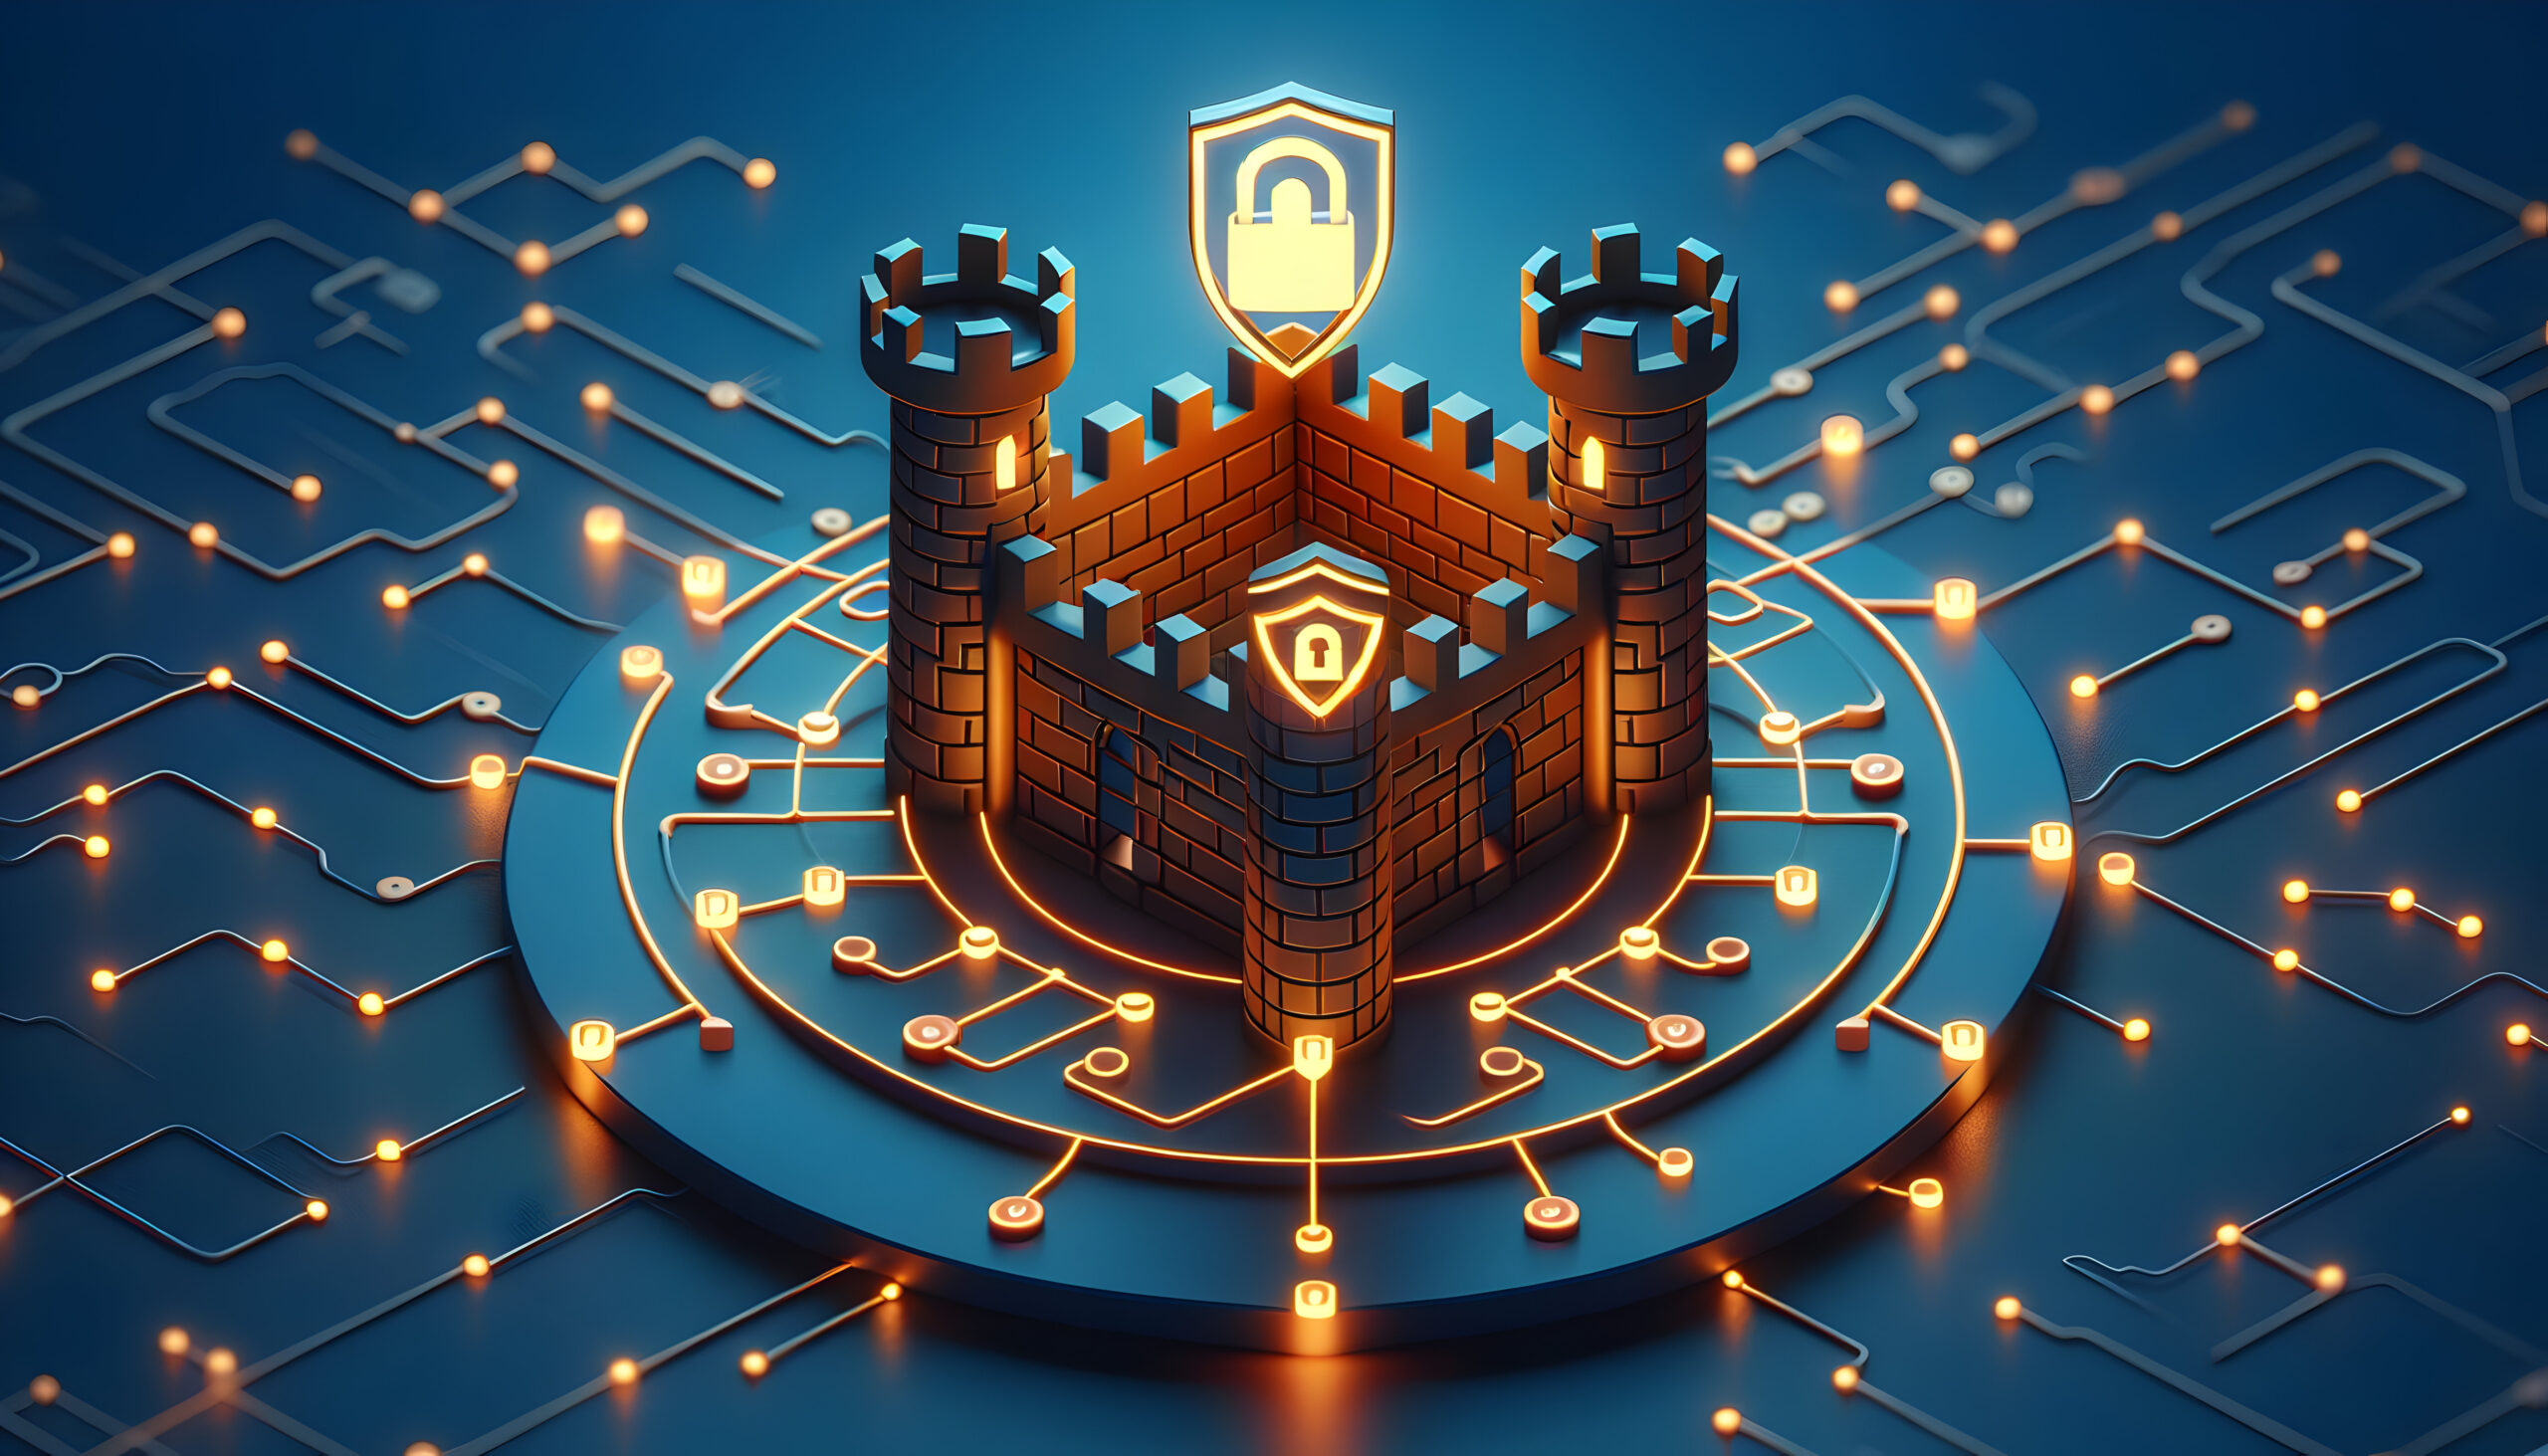 Digital fortress symbolizing robust cybersecurity defenses, surrounded by a network circuit, illustrating the concept of penetration testing.